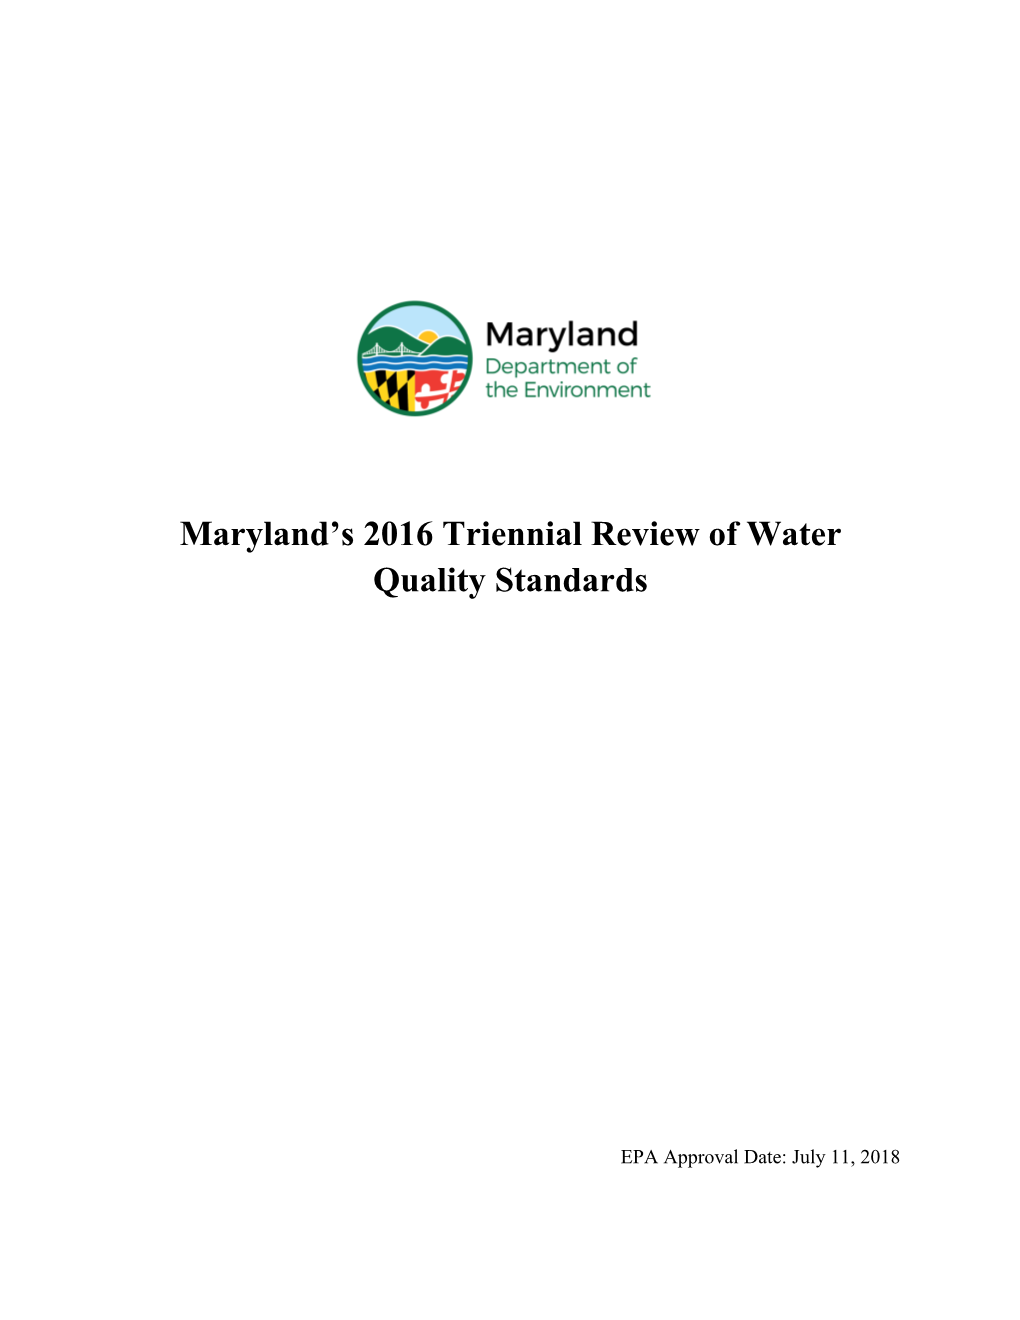 Maryland's 2016 Triennial Review of Water Quality Standards